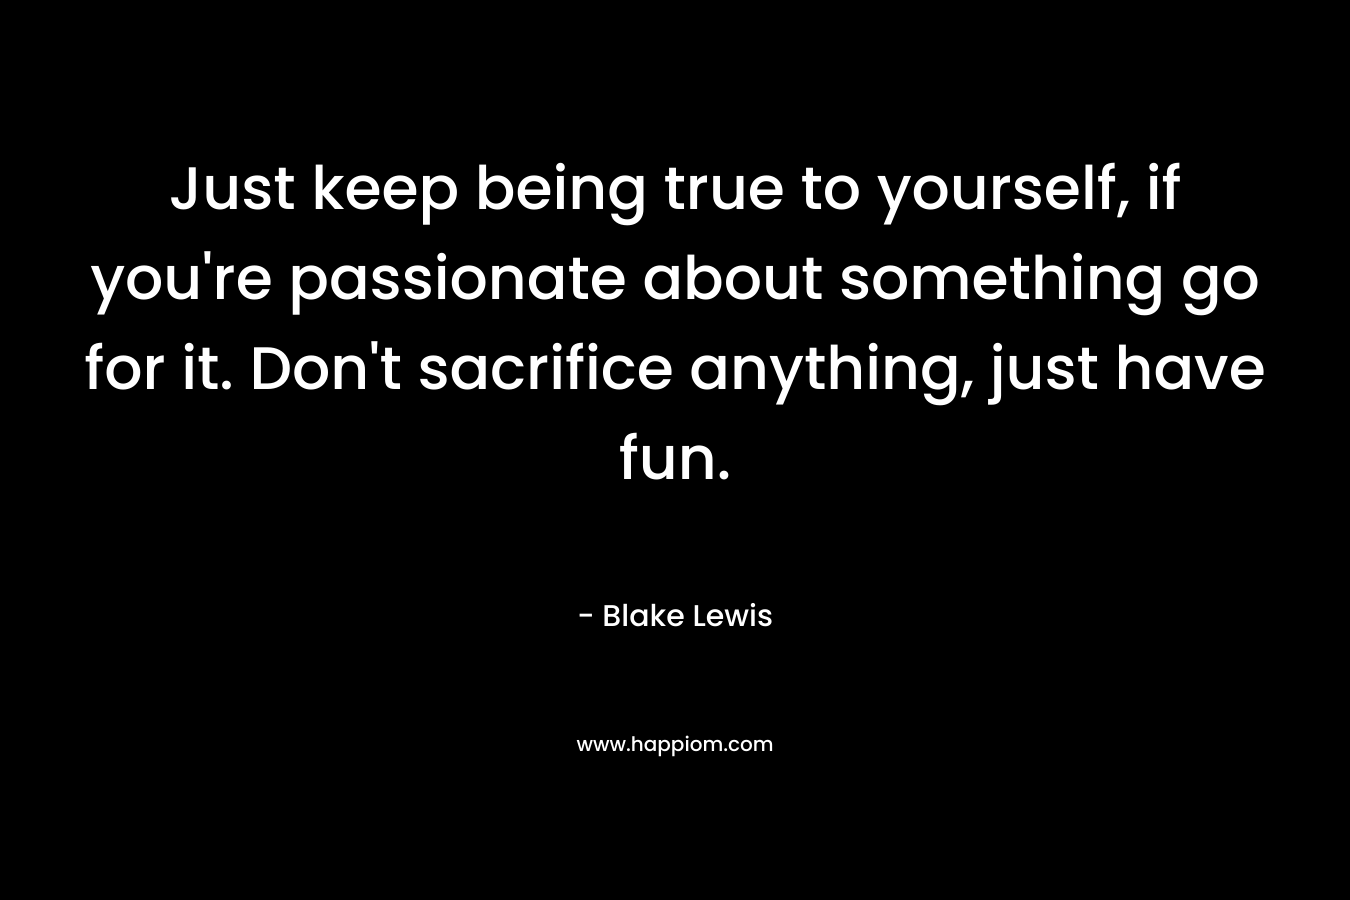 Just keep being true to yourself, if you’re passionate about something go for it. Don’t sacrifice anything, just have fun. – Blake Lewis